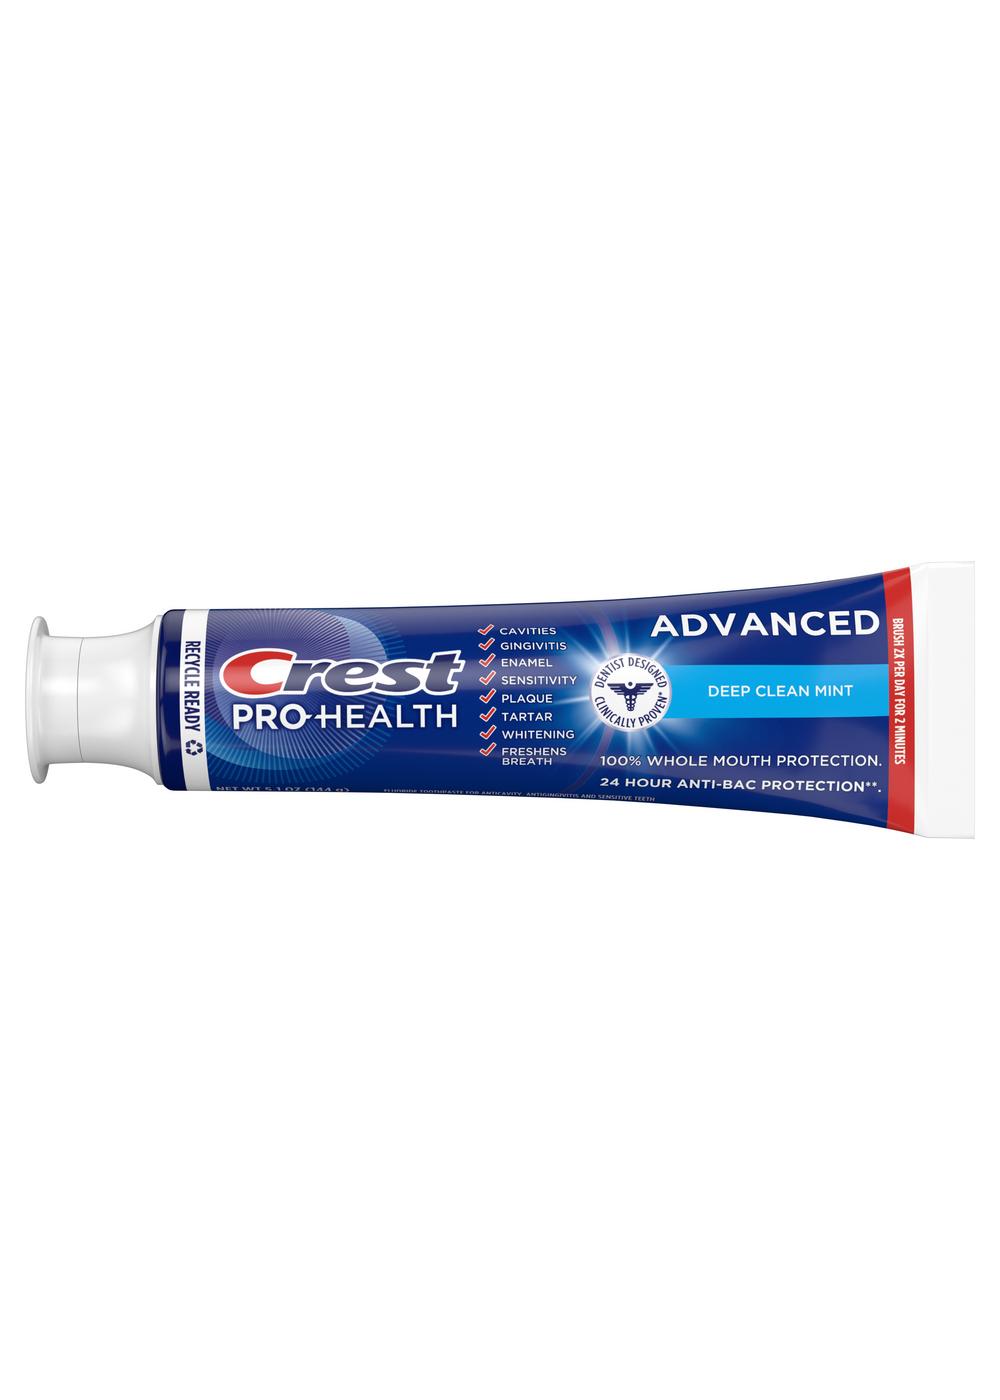 Crest Pro-Health Advanced Tooth Paste - Deep Clean Mint; image 9 of 9